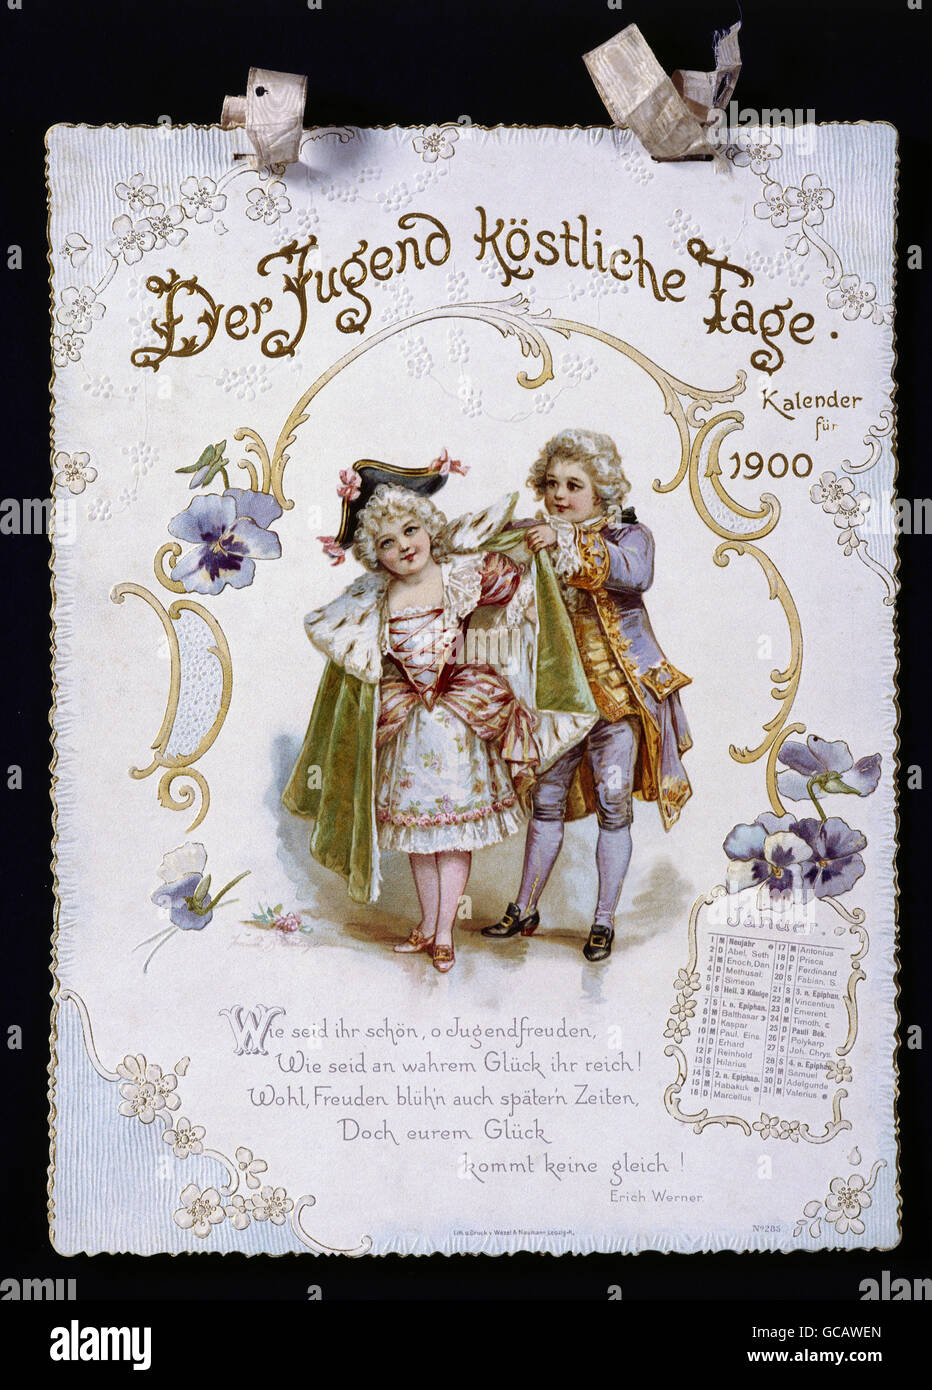 calendar, page, 'Der Jugend köstliche Tage' ('Delightful, Days of Youth'), colour lithograph, embossed, 1900,  , Additional-Rights-Clearences-Not Available Stock Photo